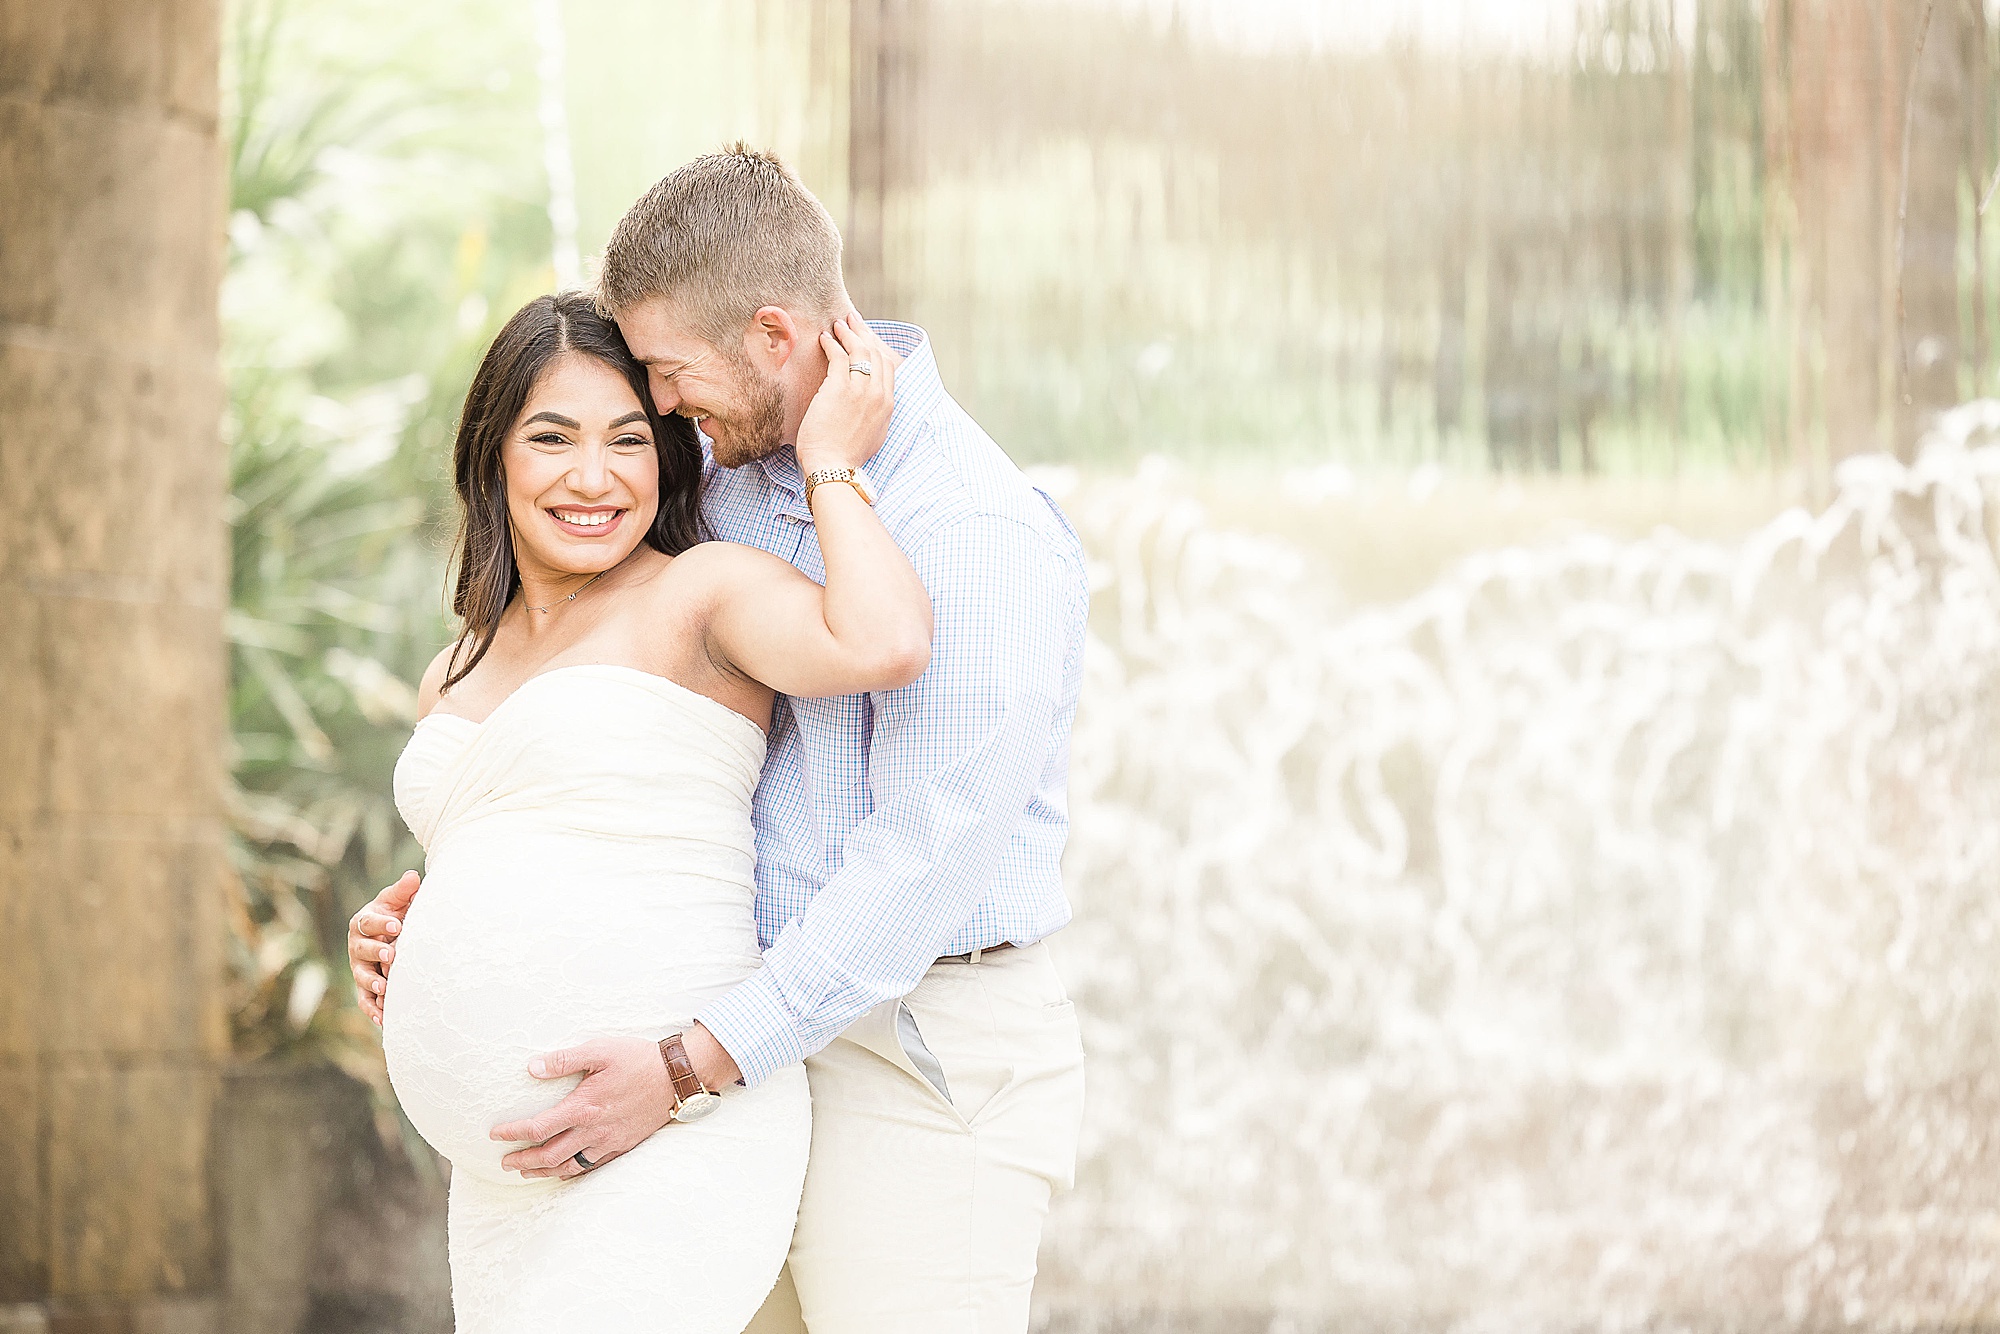 dad-to-be makes mom laugh during maternity session